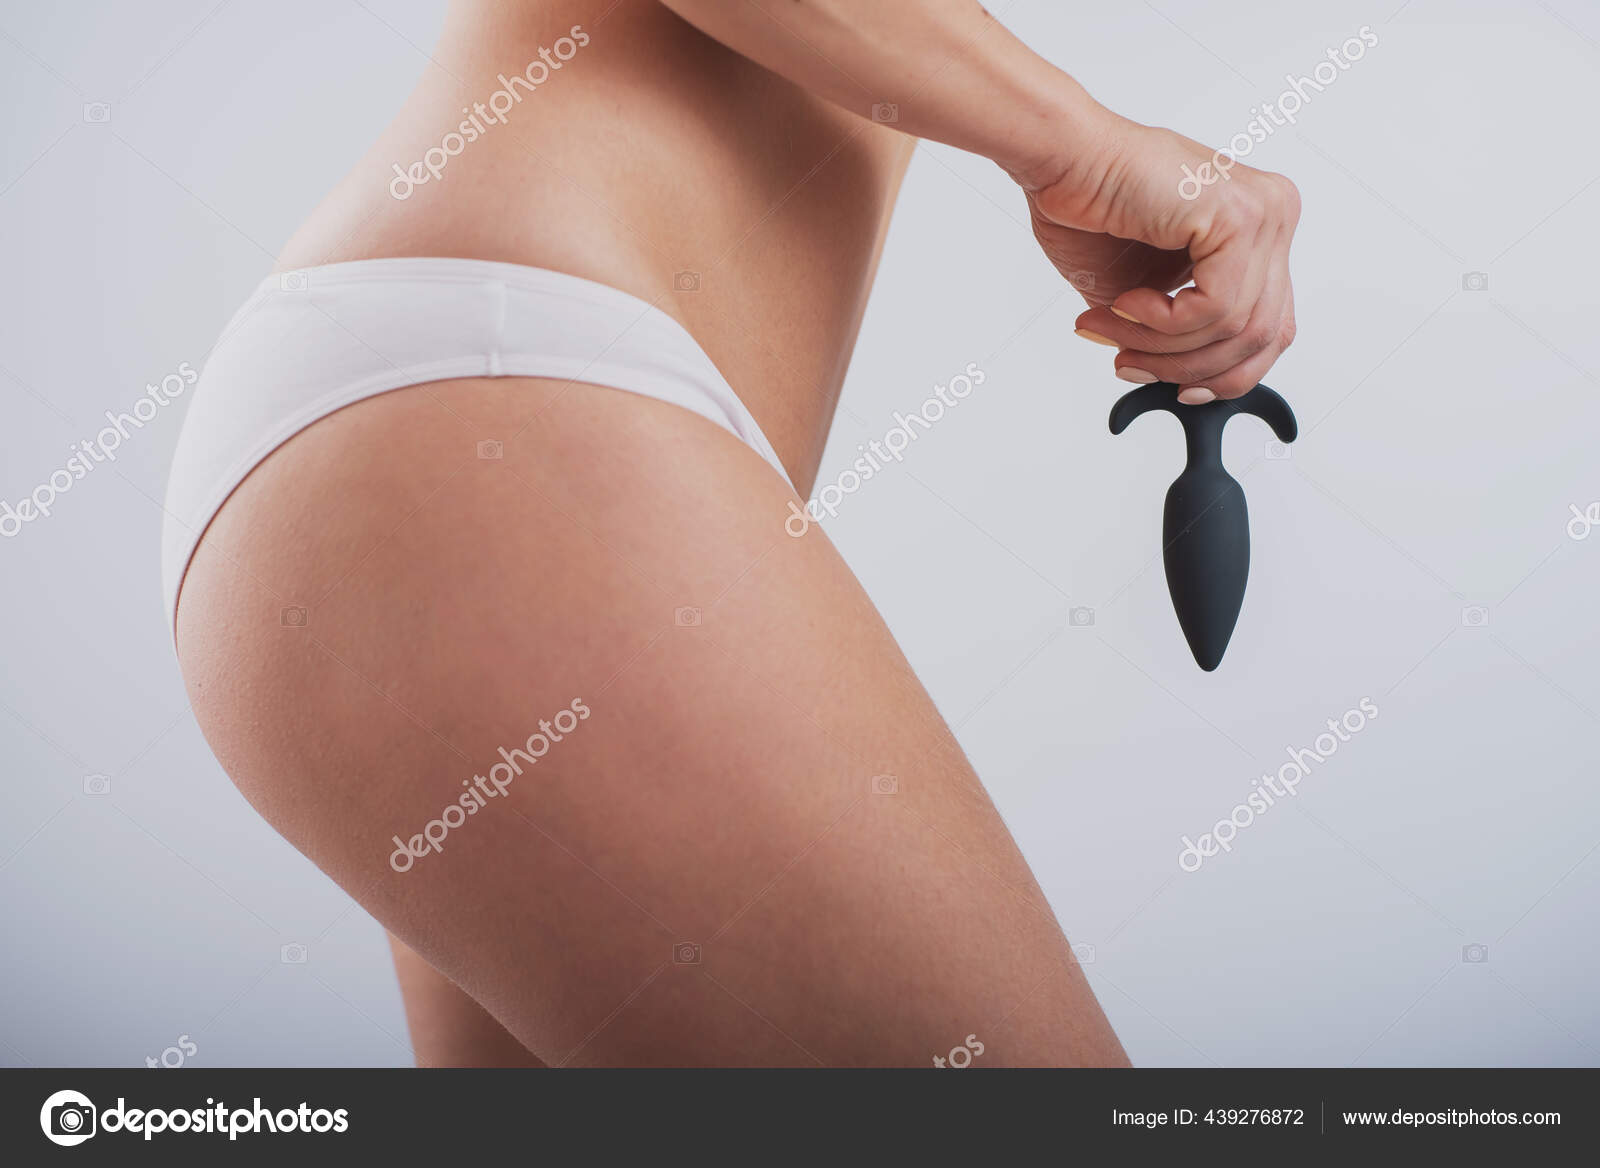 A faceless woman in white cotton panties holds a black butt plug